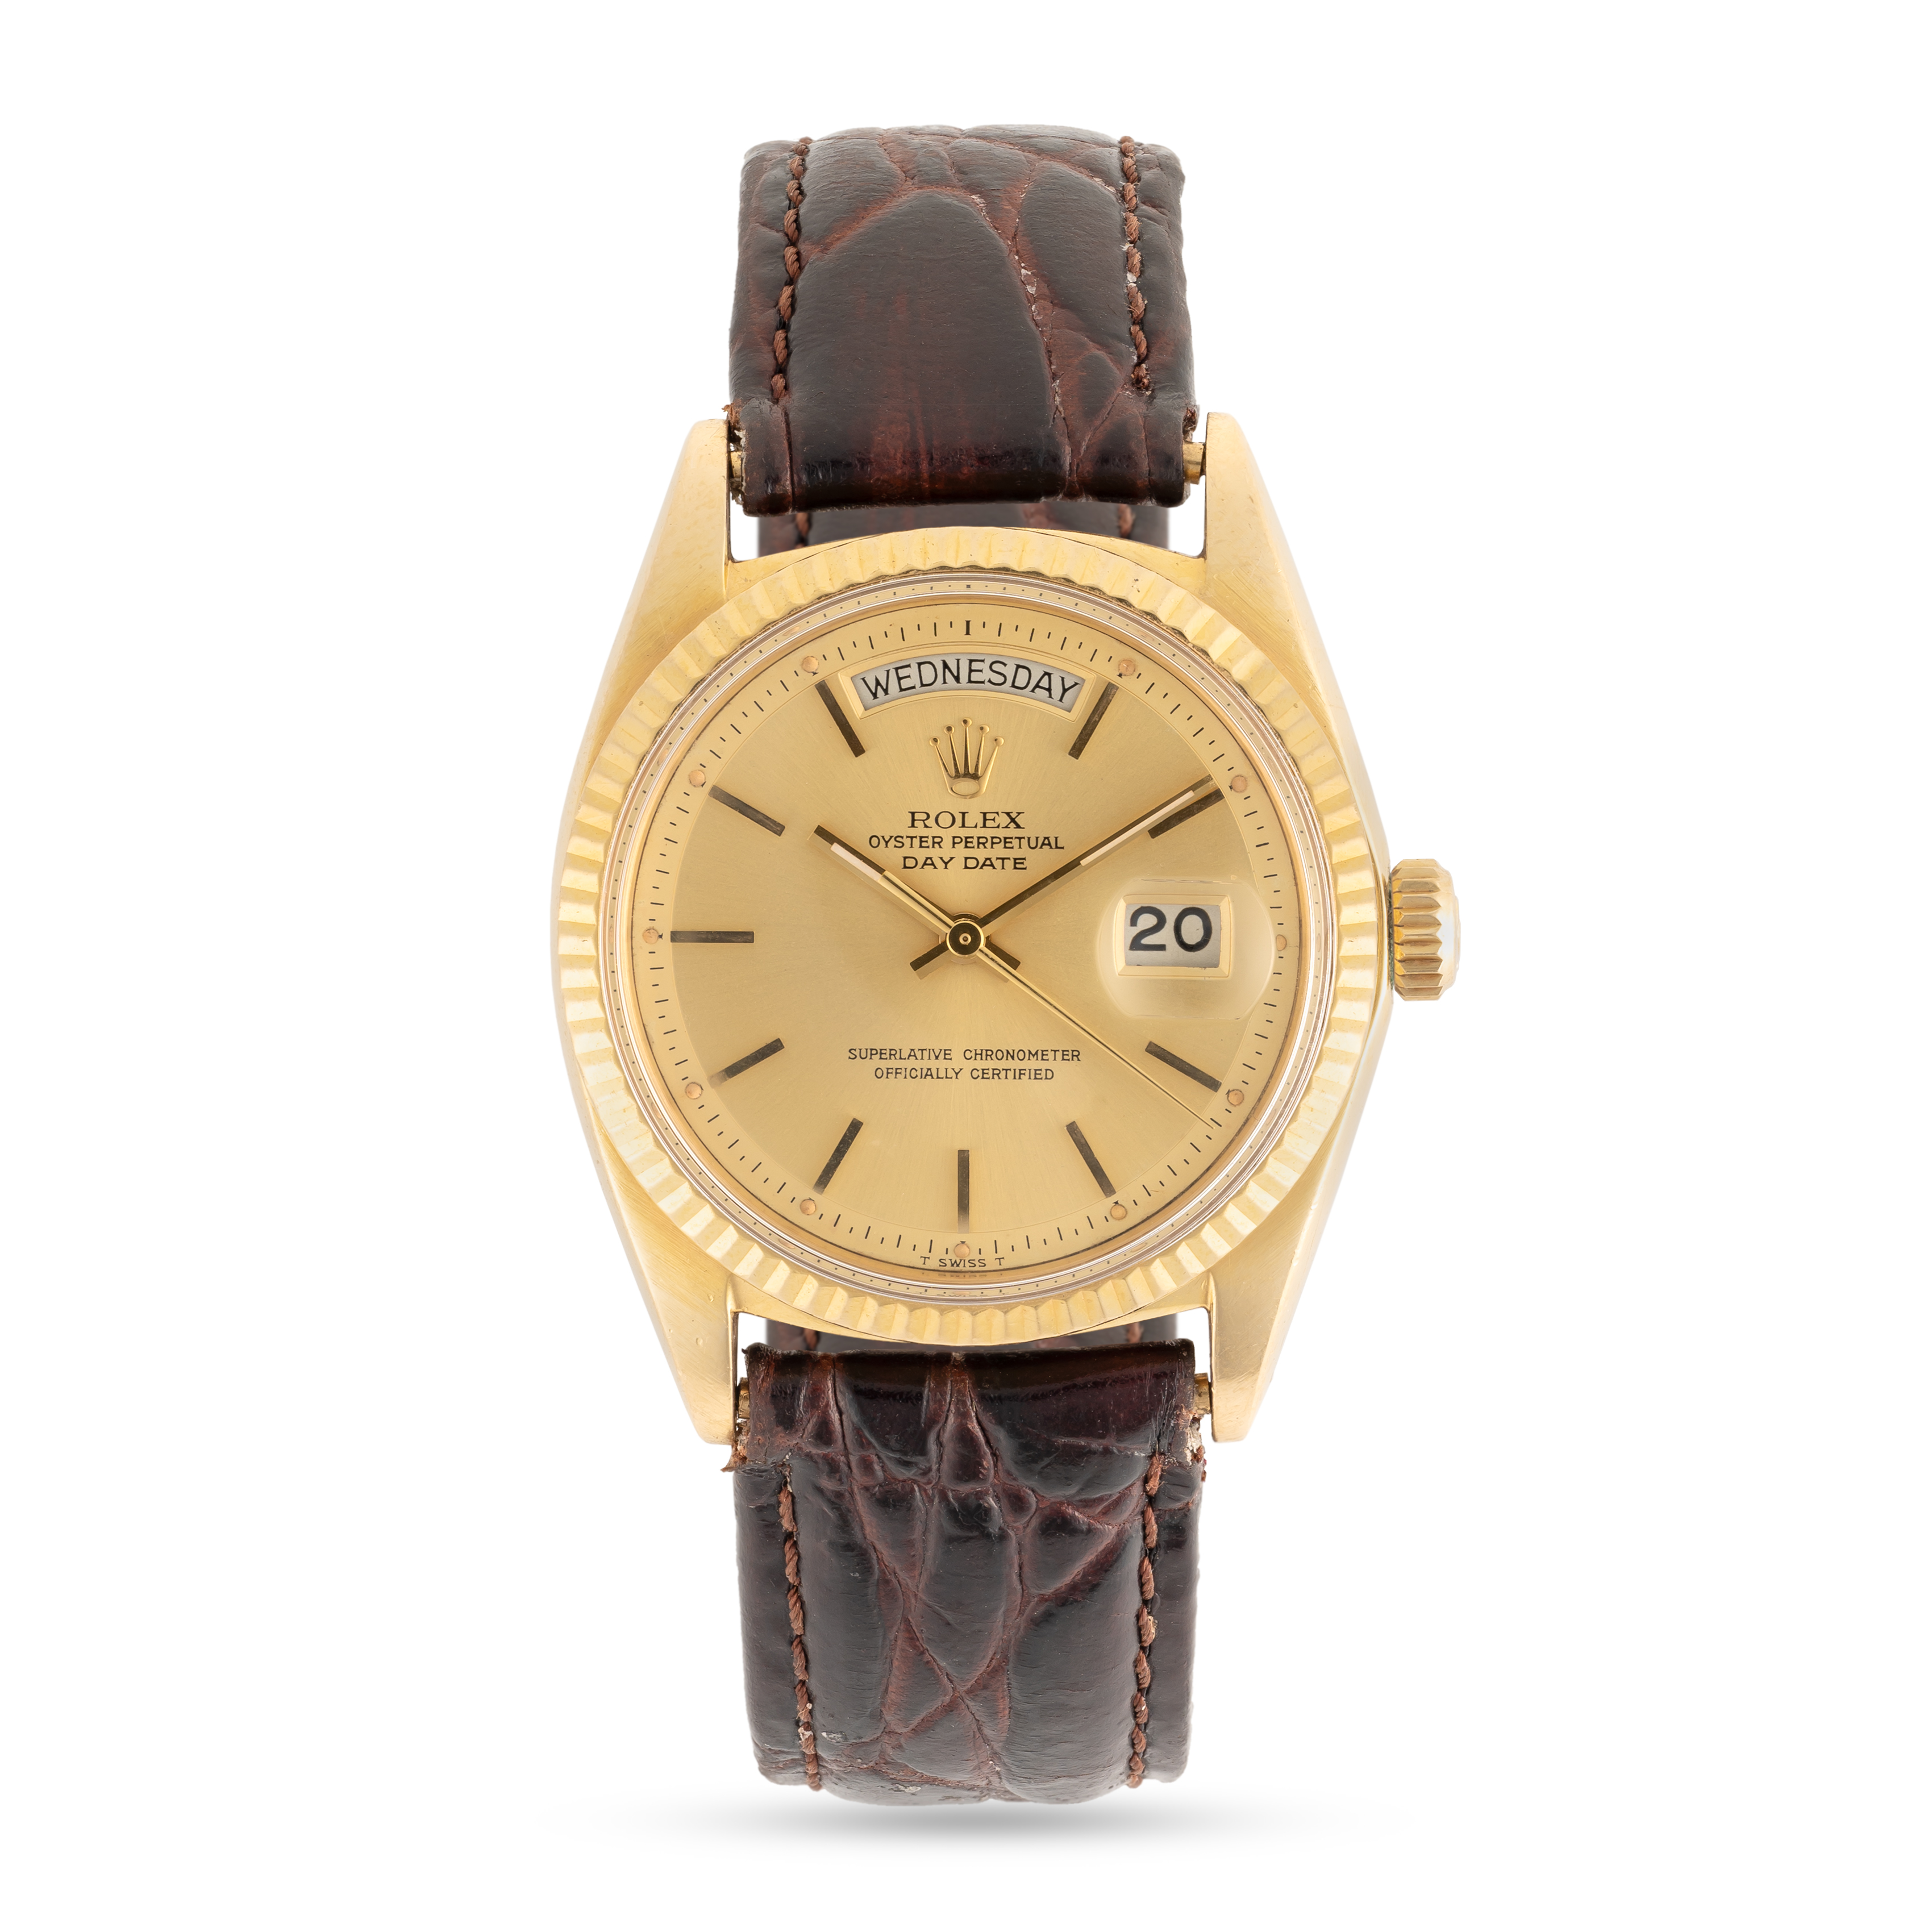 A GENTLEMAN'S SIZE 18K SOLID YELLOW GOLD ROLEX OYSTER PERPETUAL DAY DATE WRIST WATCH CIRCA 1971, - Image 2 of 8